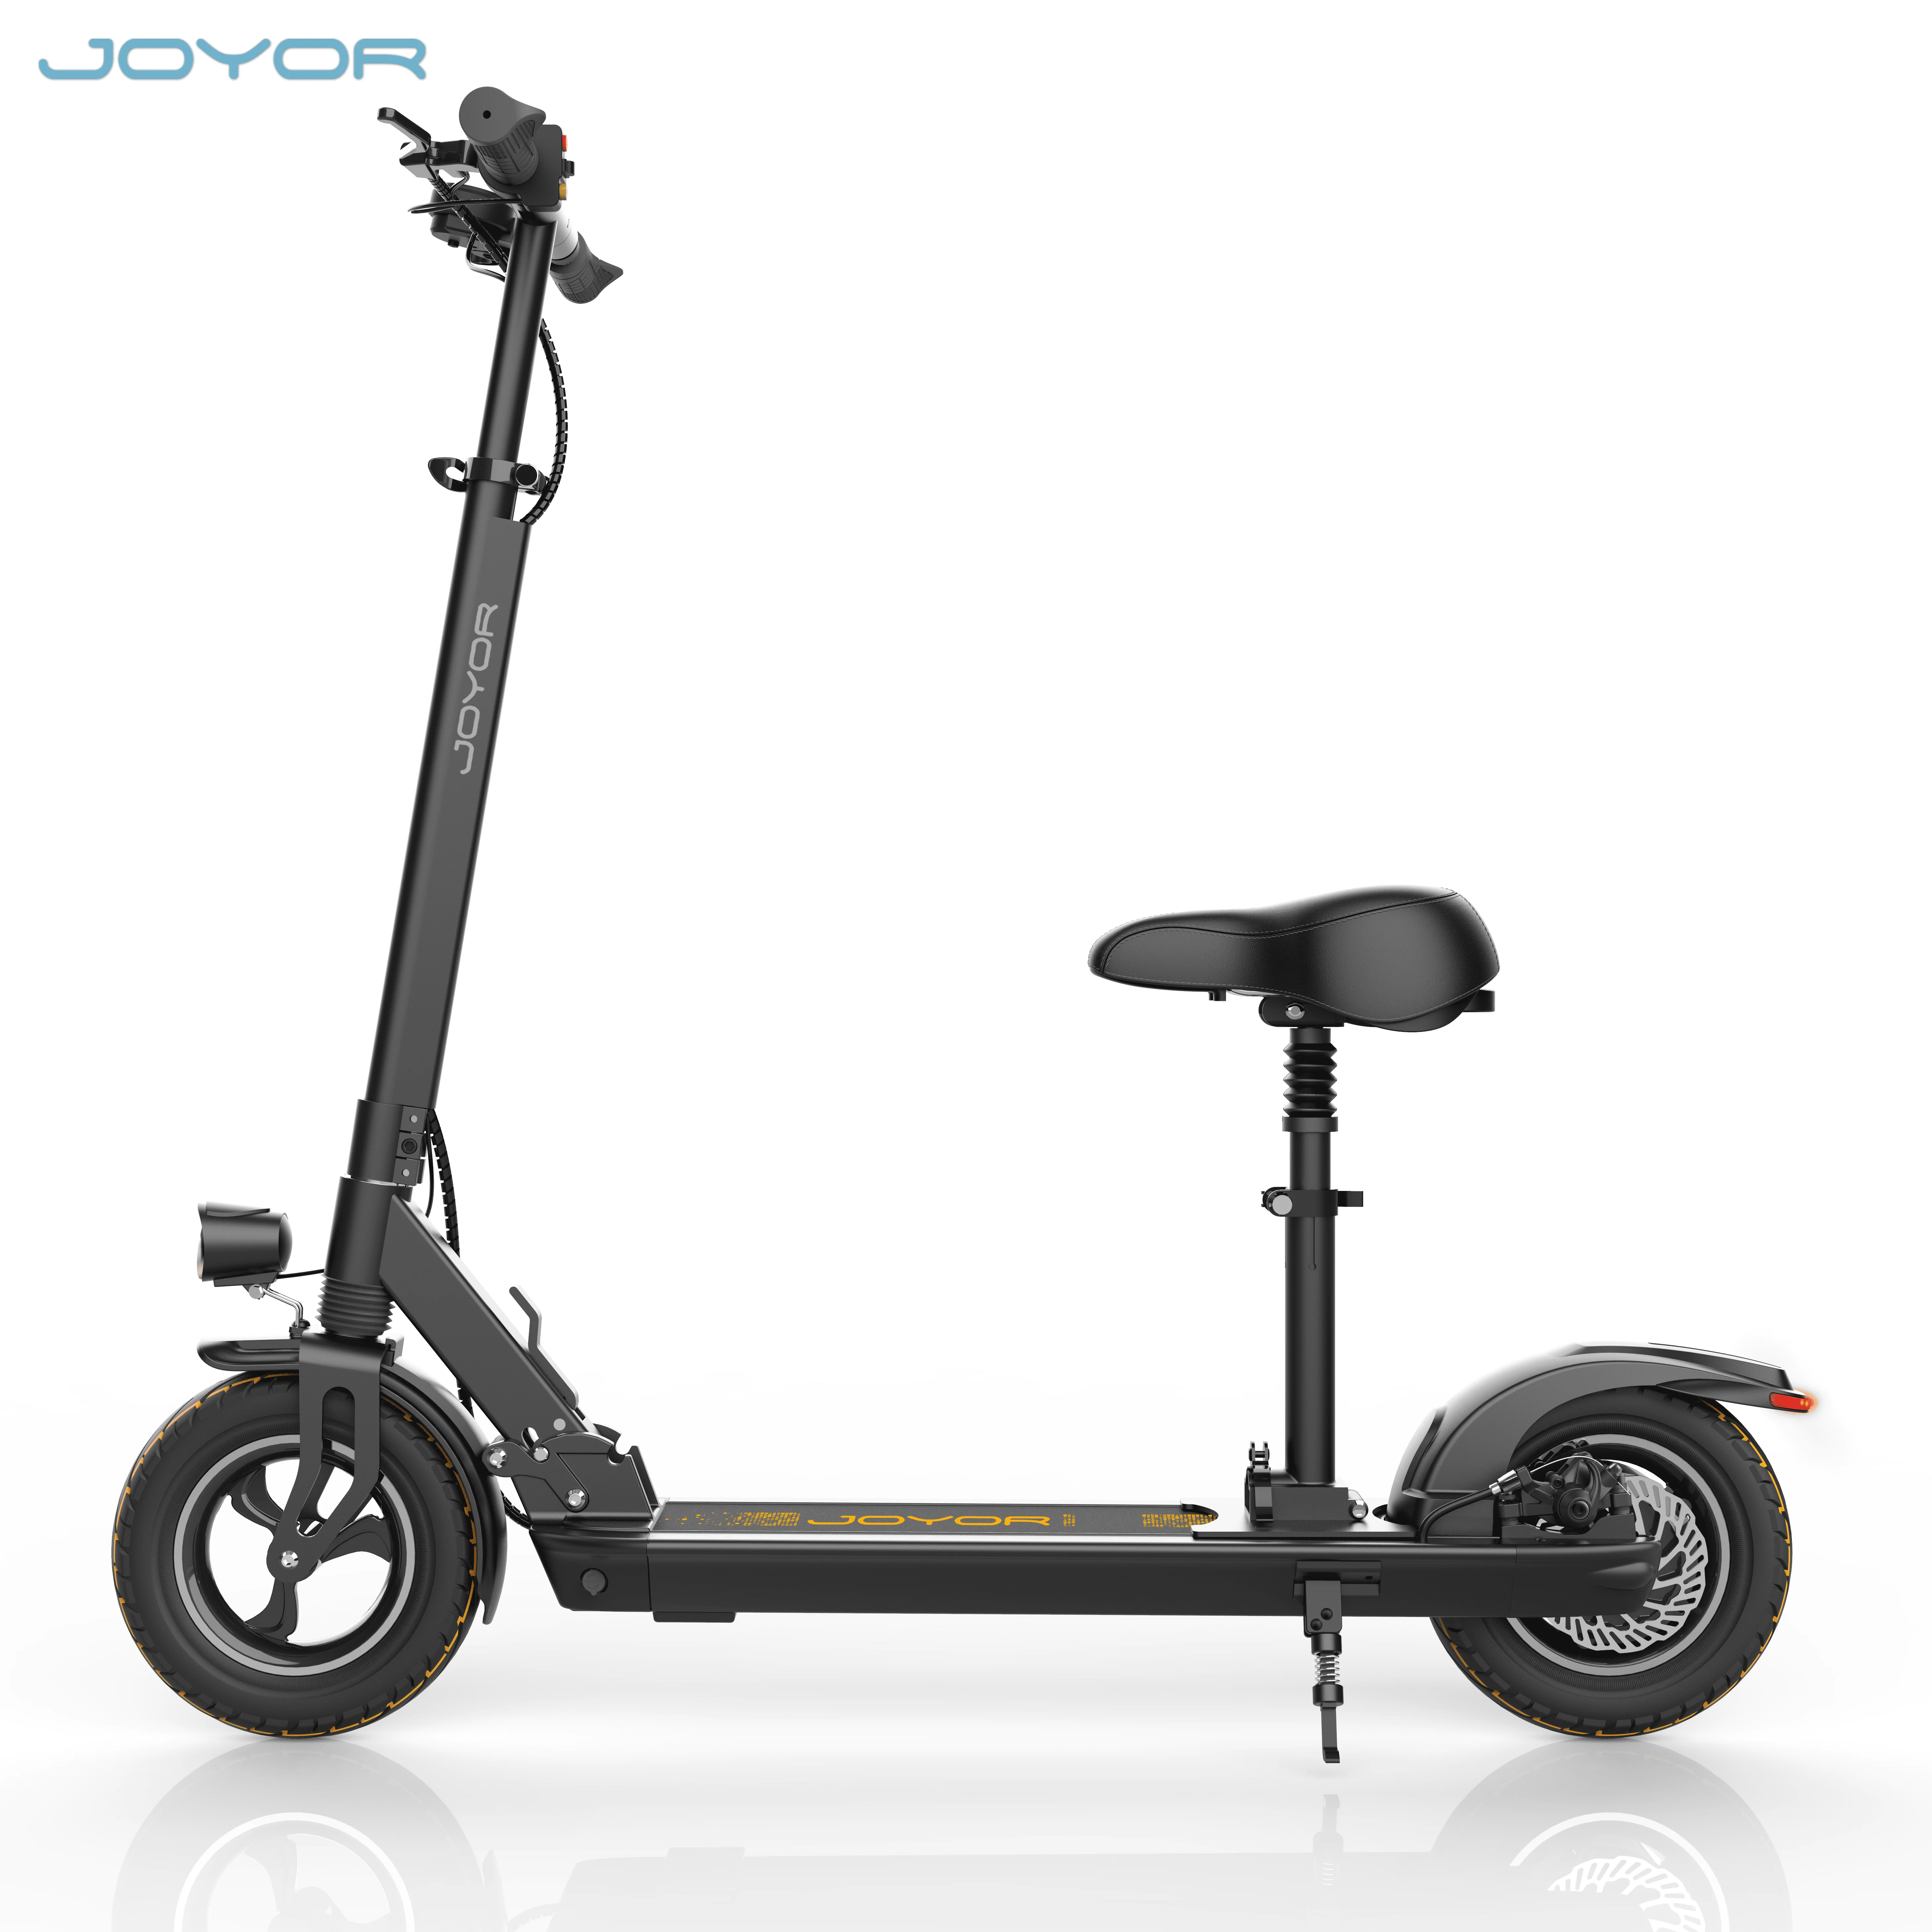 Joyor X1 long range folding electric scooter 36V 400W power scooter electric with UL certificated for adults